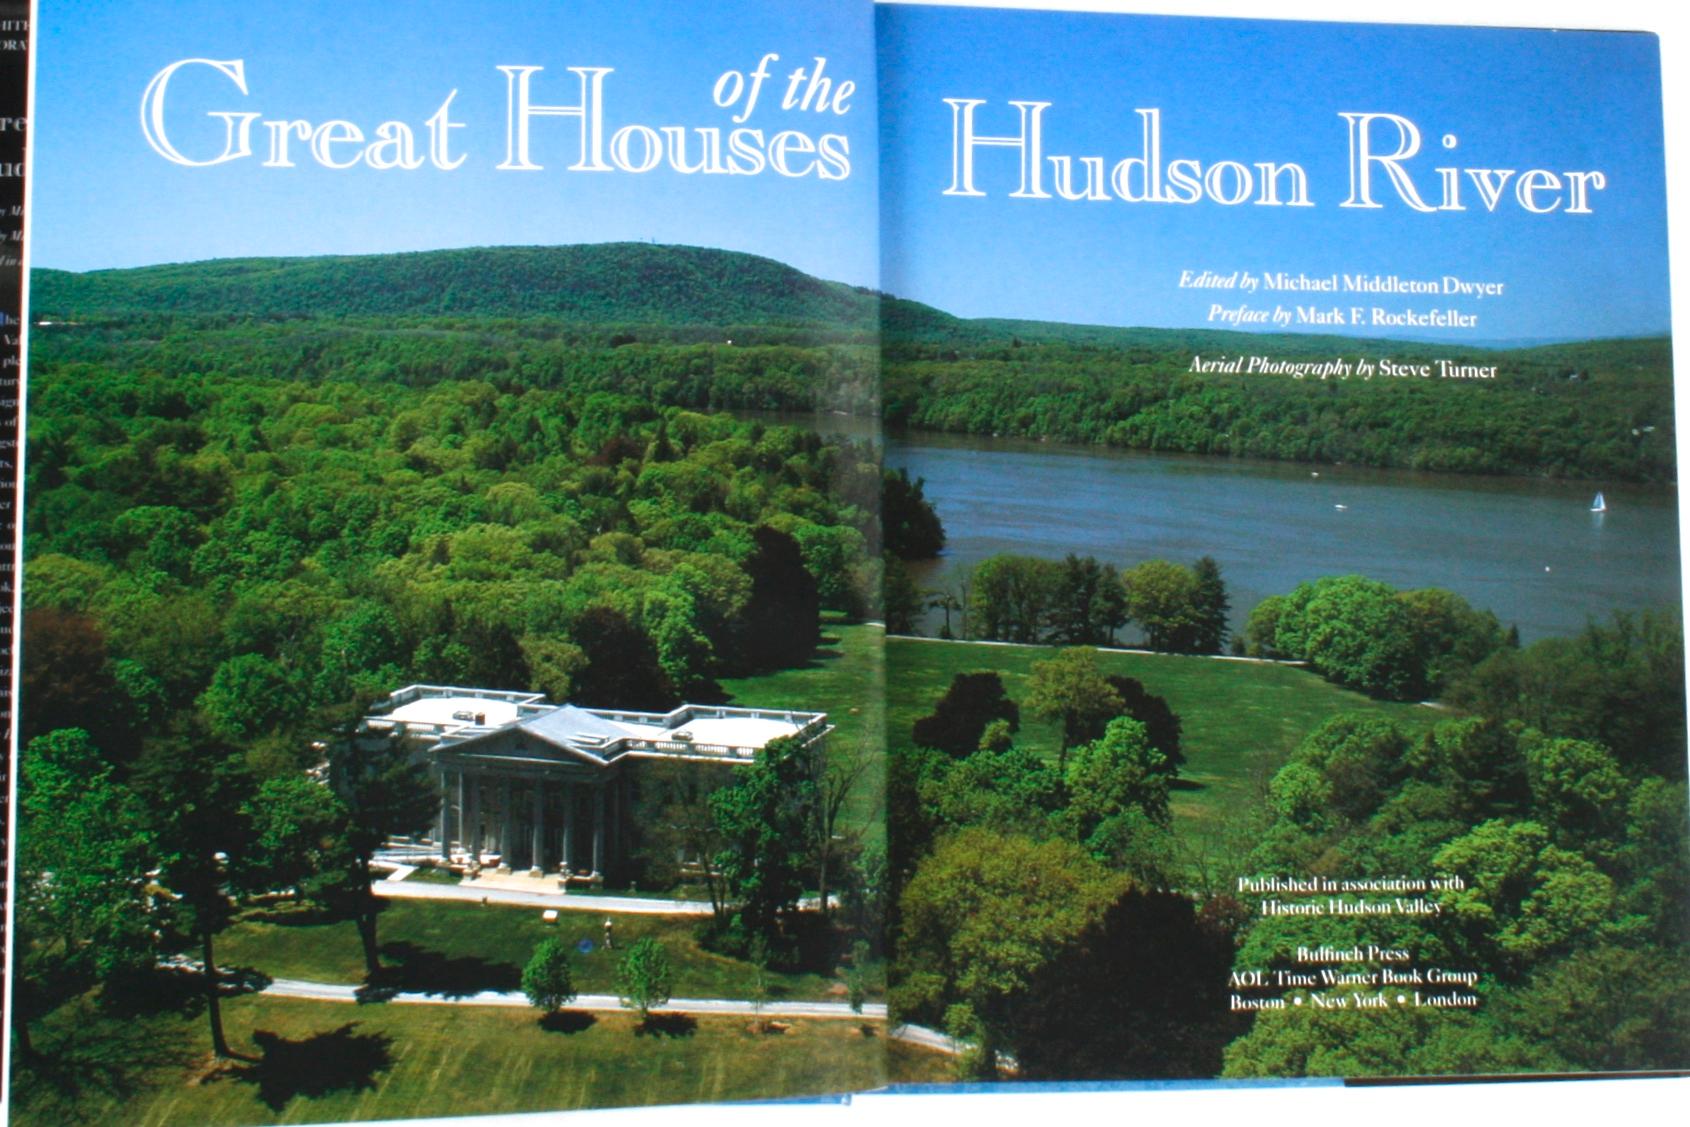 Great Houses of the Hudson River. Boston: Bulfinch Press, 2003. Stated first edition 2nd printing hardcover with dust jacket. 208 pp. A beautiful coffee table book on the great estates of the Hudson River Valley. It includes fine examples of